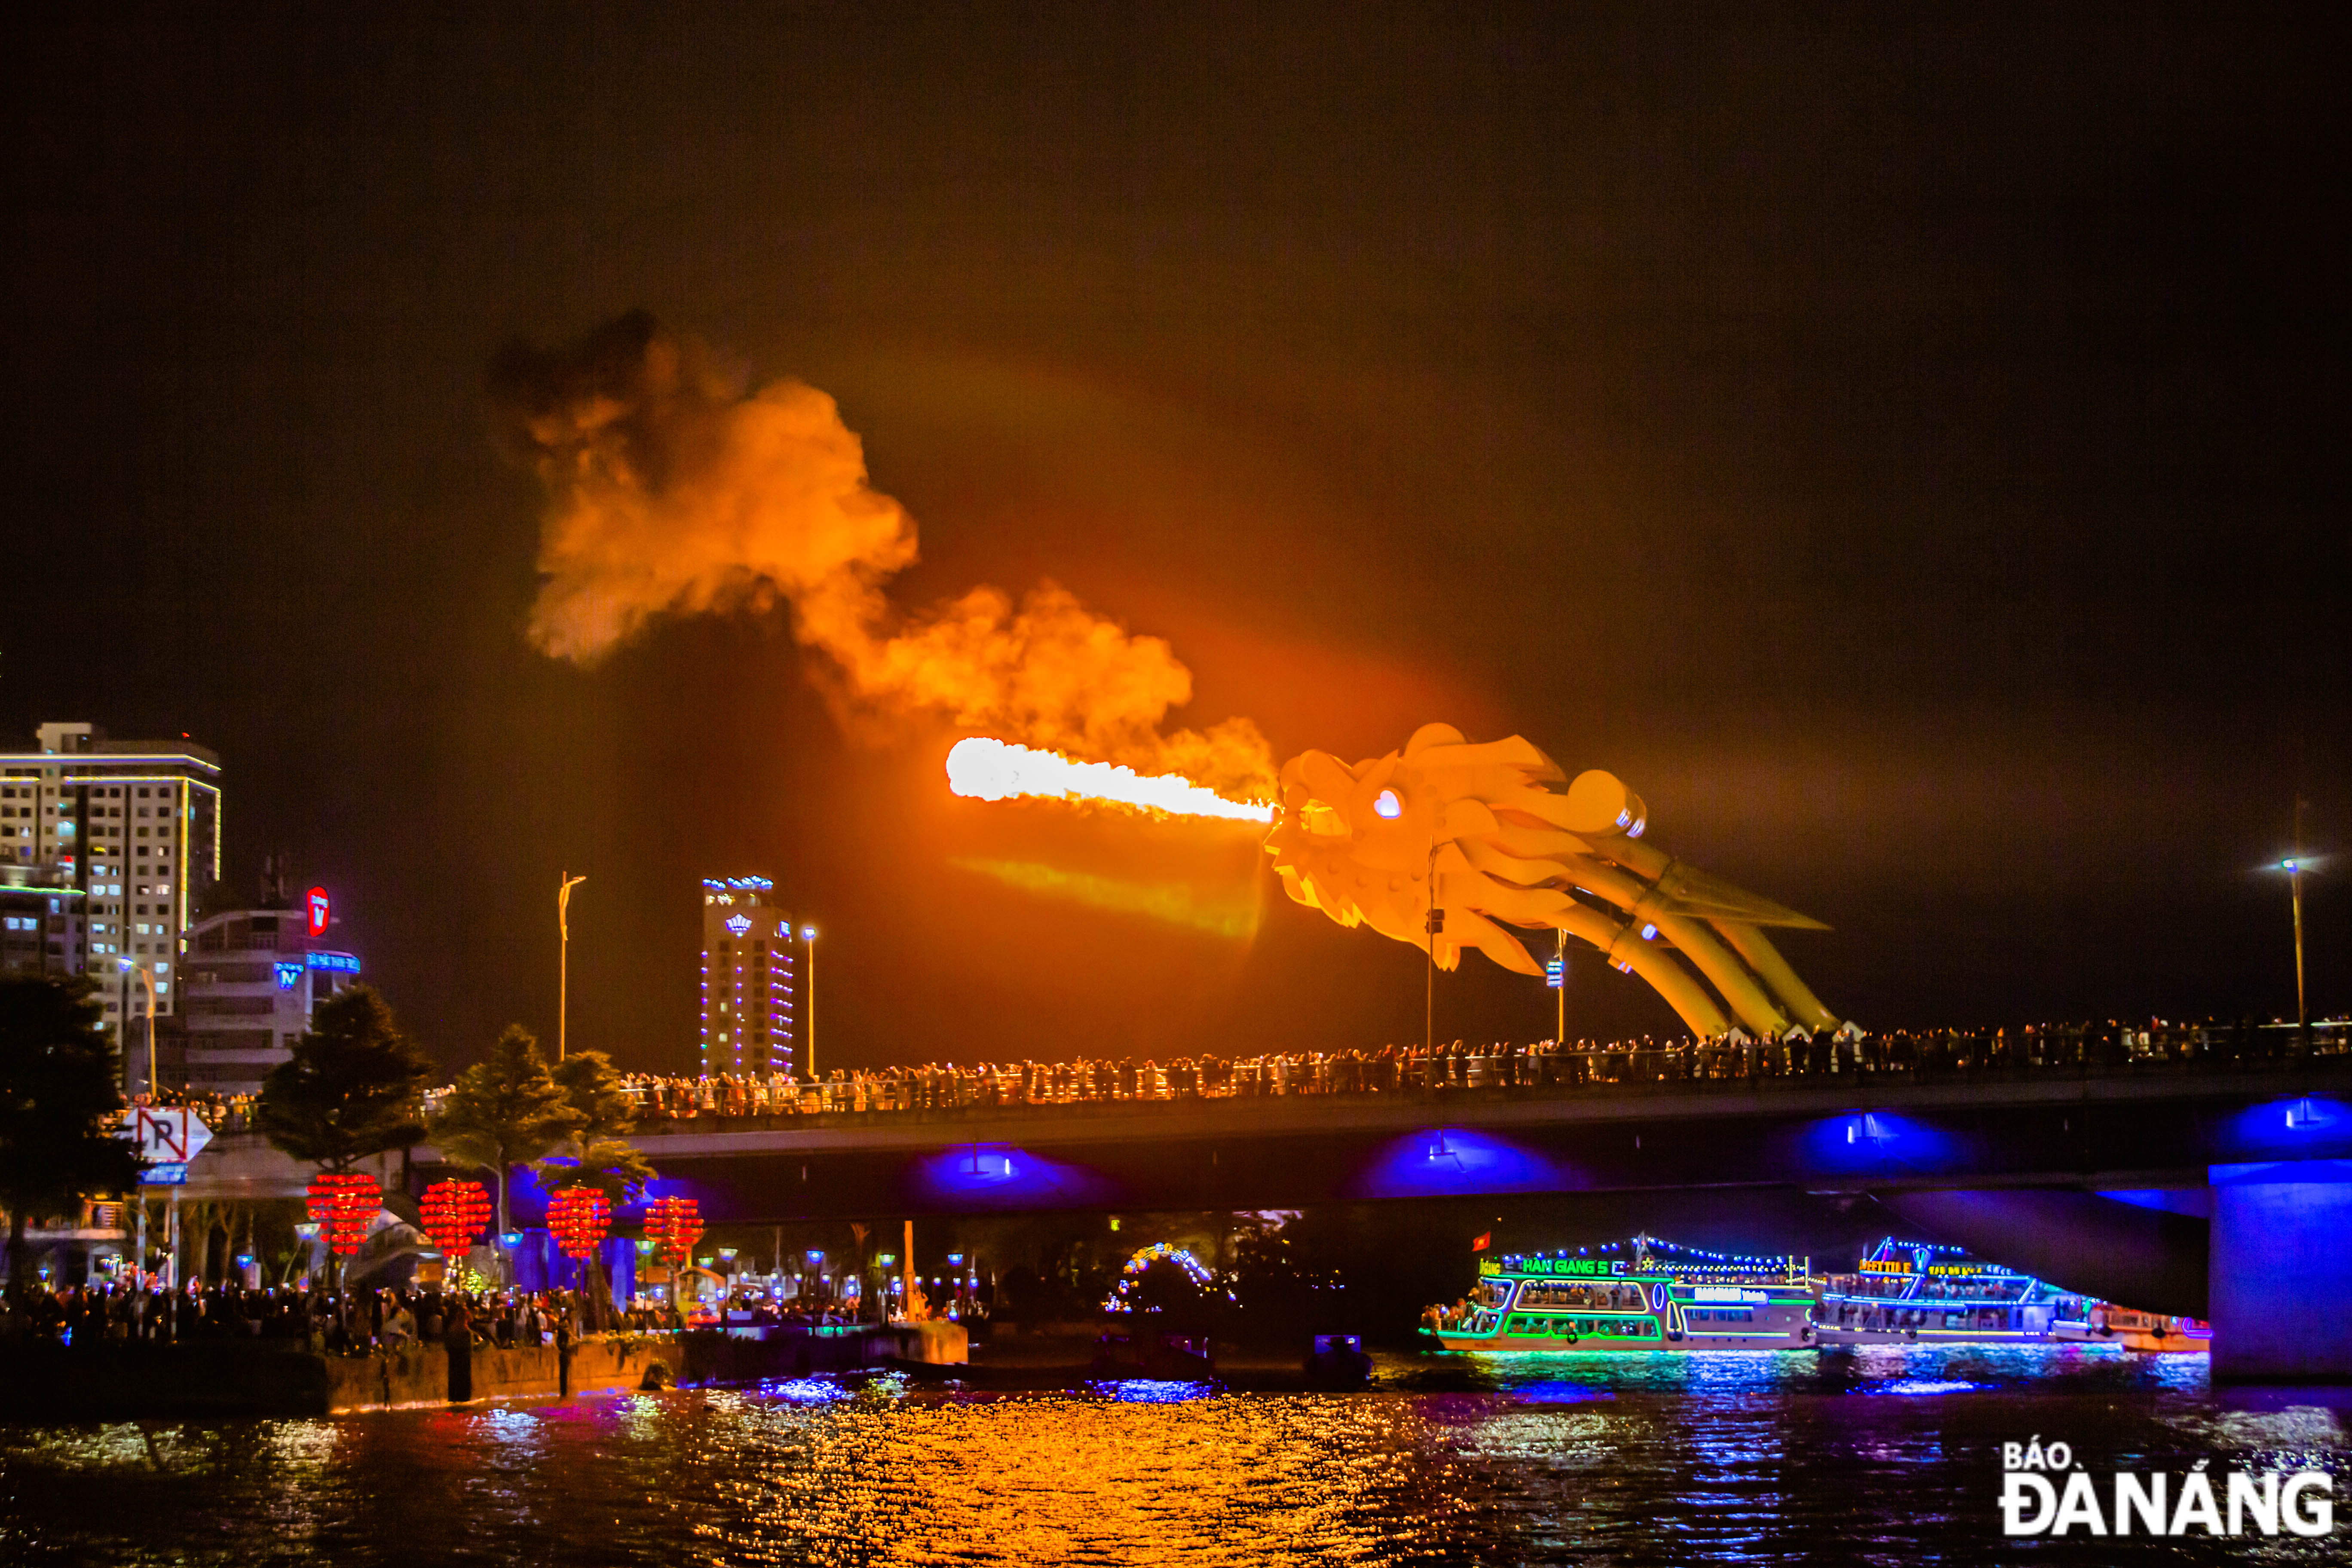 New Year's Eve falls on Sunday, so many tourists are seen gathering at the Dragon Bridge to watch fire-breathing and water-squirting shows